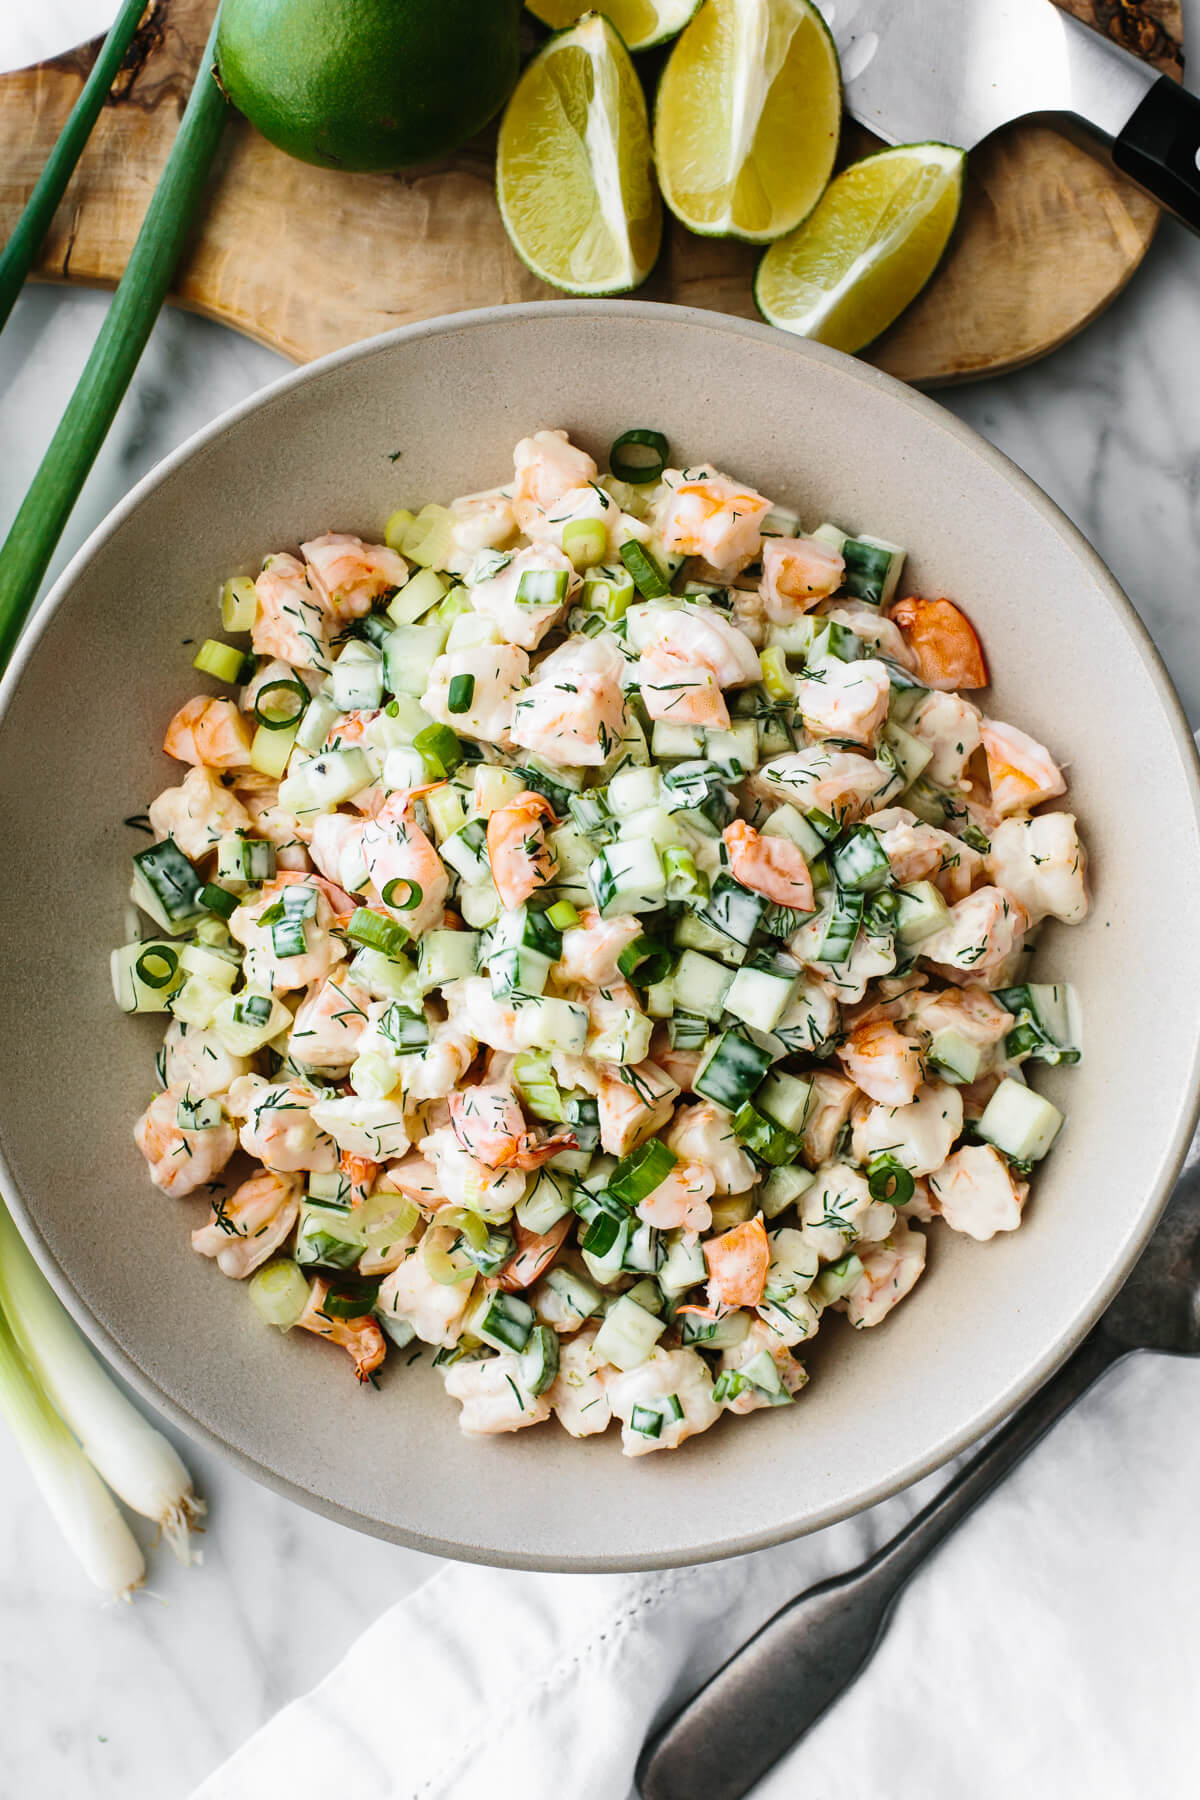 Cucumber shrimp salad in a large serving bowl next to limes